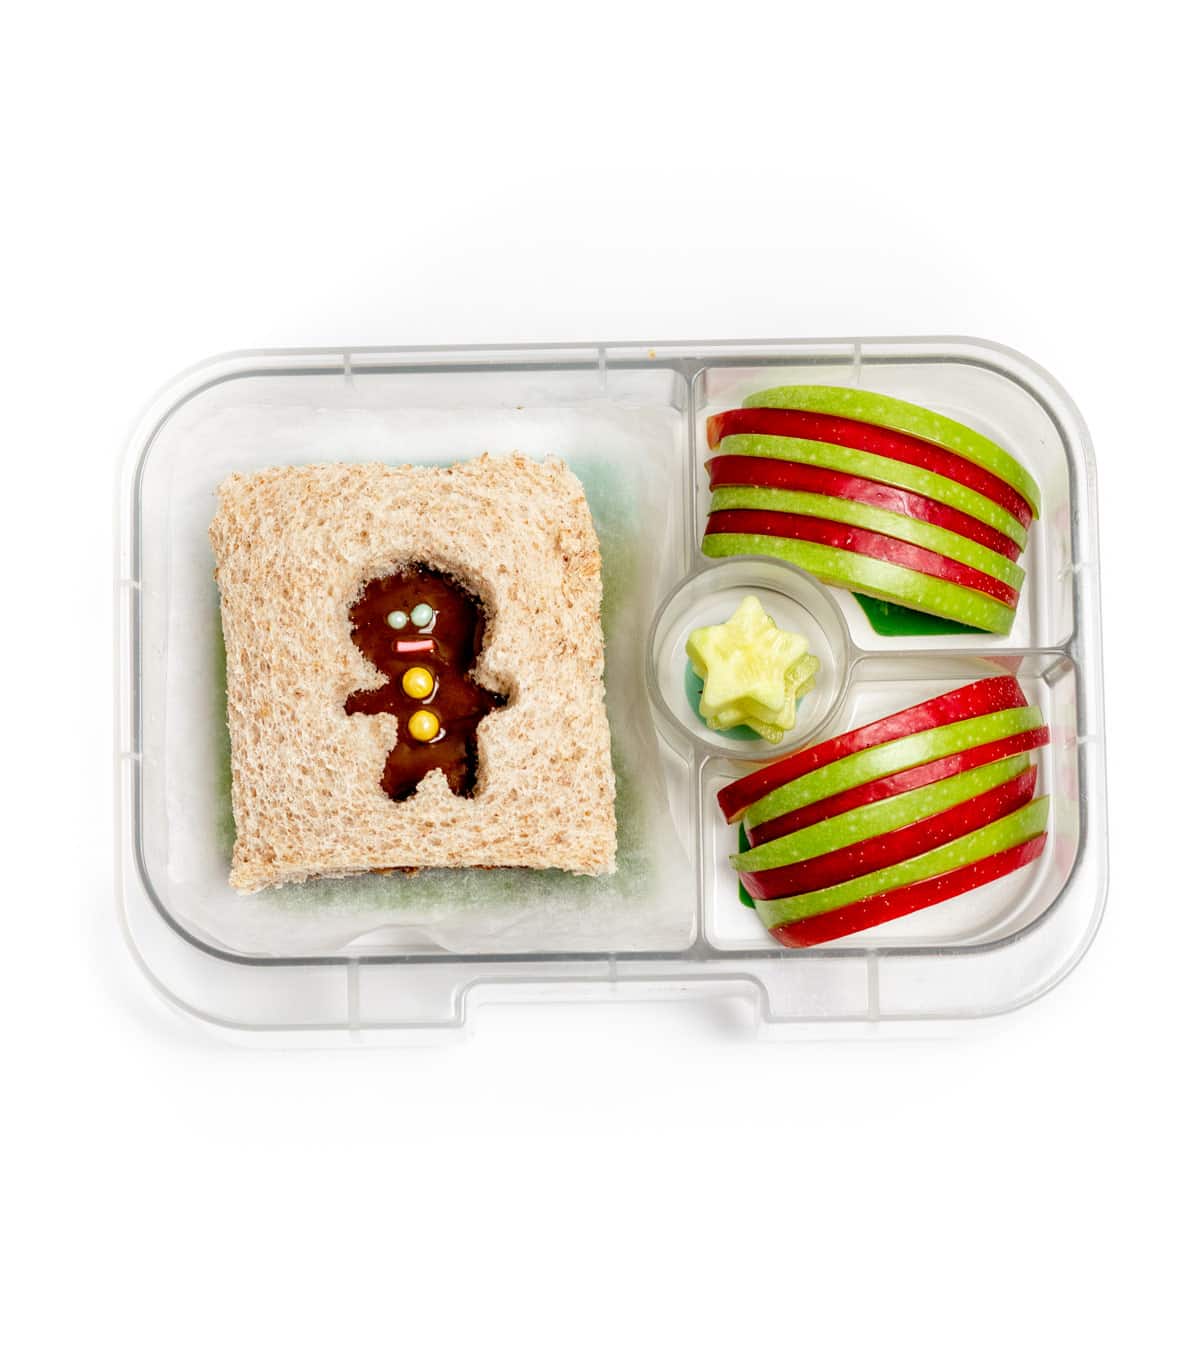 A lunchbox with one gingerbread man sandwich, cucumber slices cut into mini stars, and an arrangement of red and green apple slices.